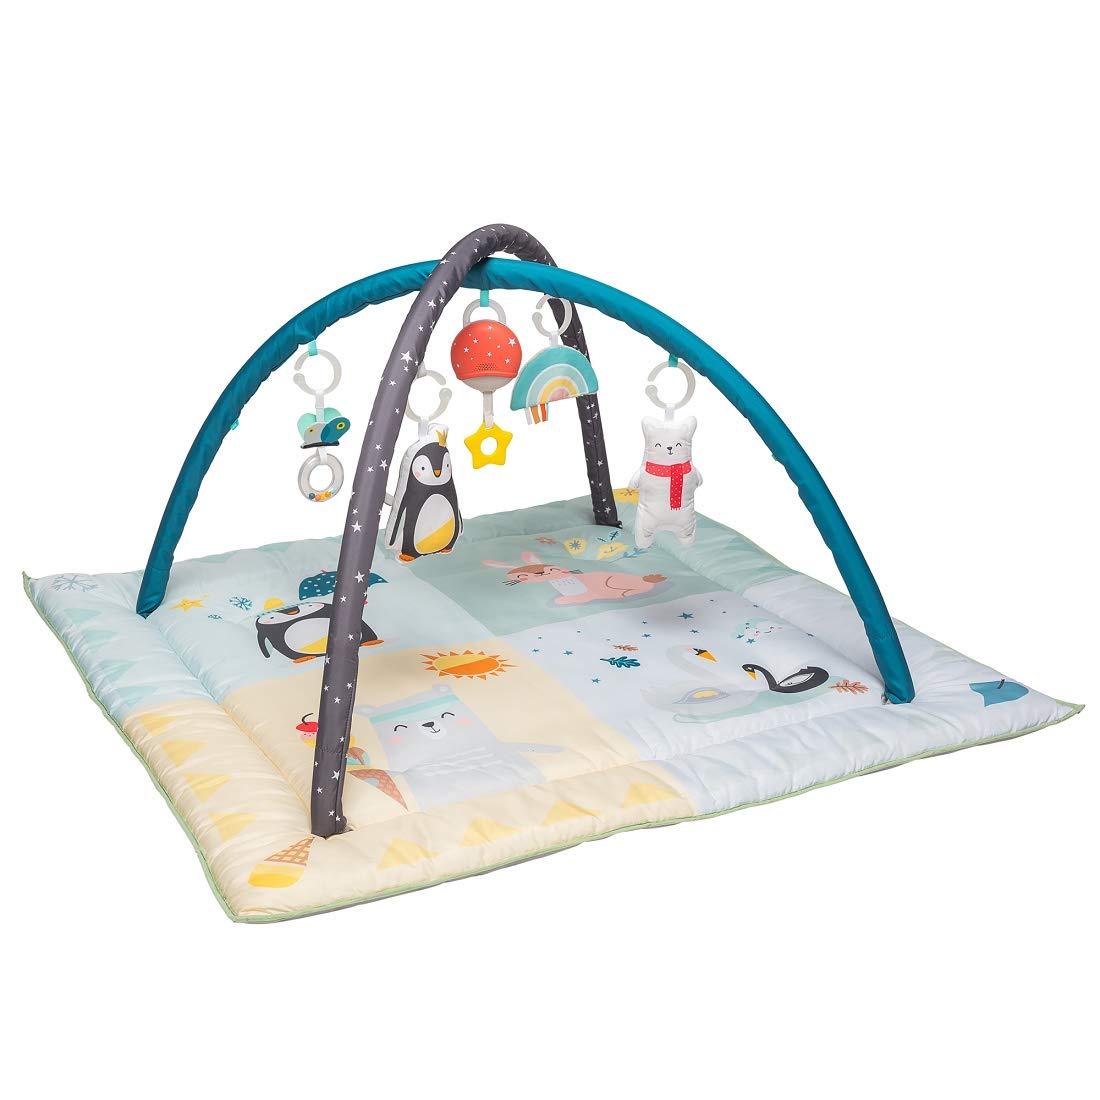 Taf Toys Music & Light Thickly Padded North Pole 4 Seasons Baby Gym. Perfect For Newborns. Activity Gym & Playmat. Designed To Encourage Baby’s Senses Development, Suitable for Boys & Girls From Birth